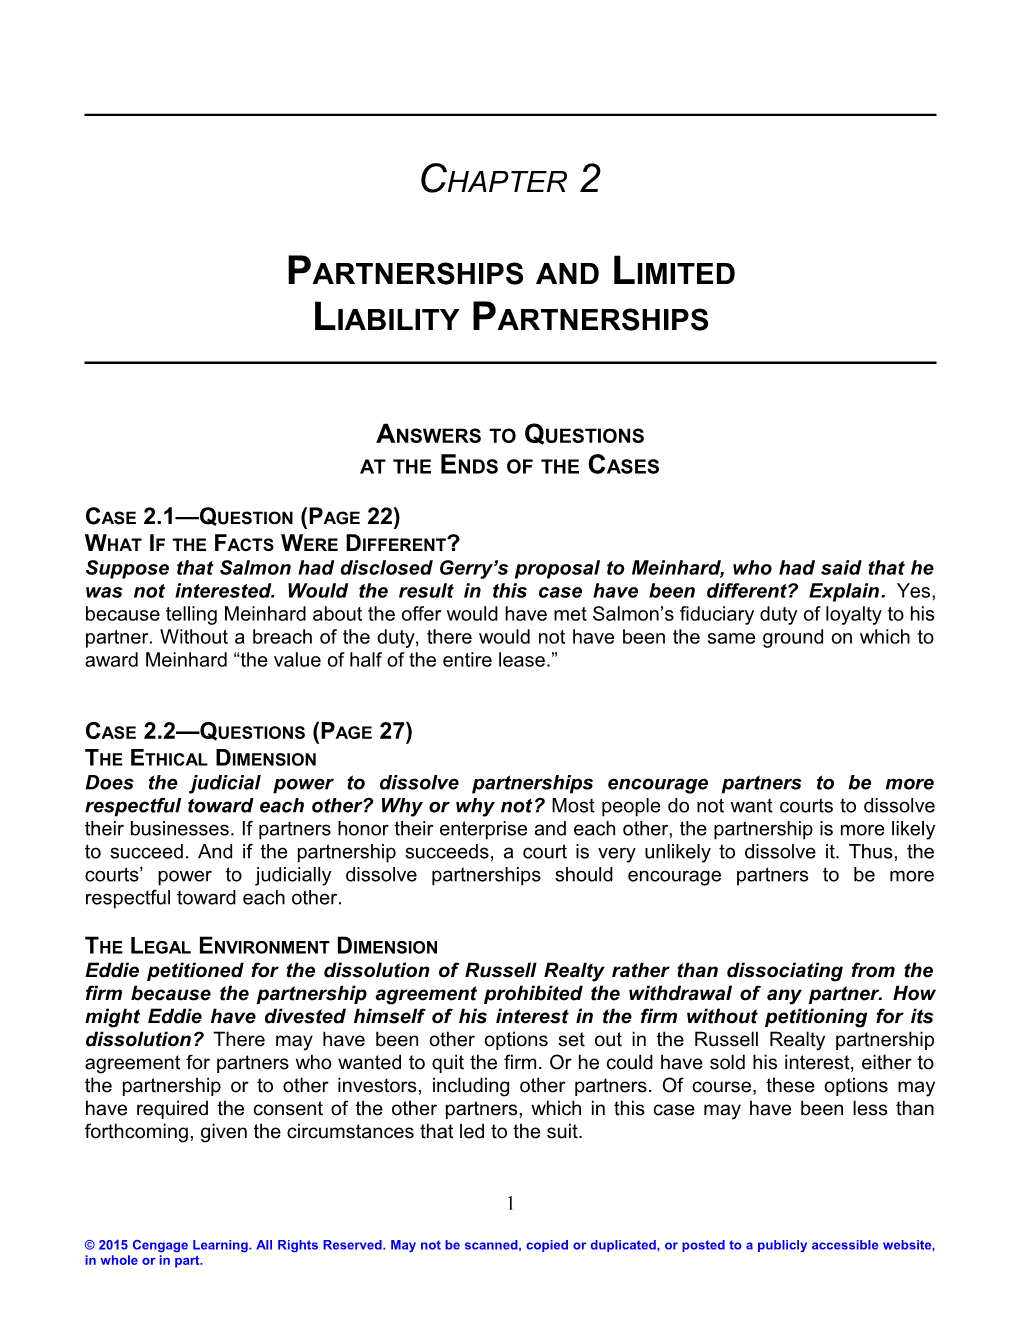 Chapter 2: Partnerships and Limited Liability Partnerships 7